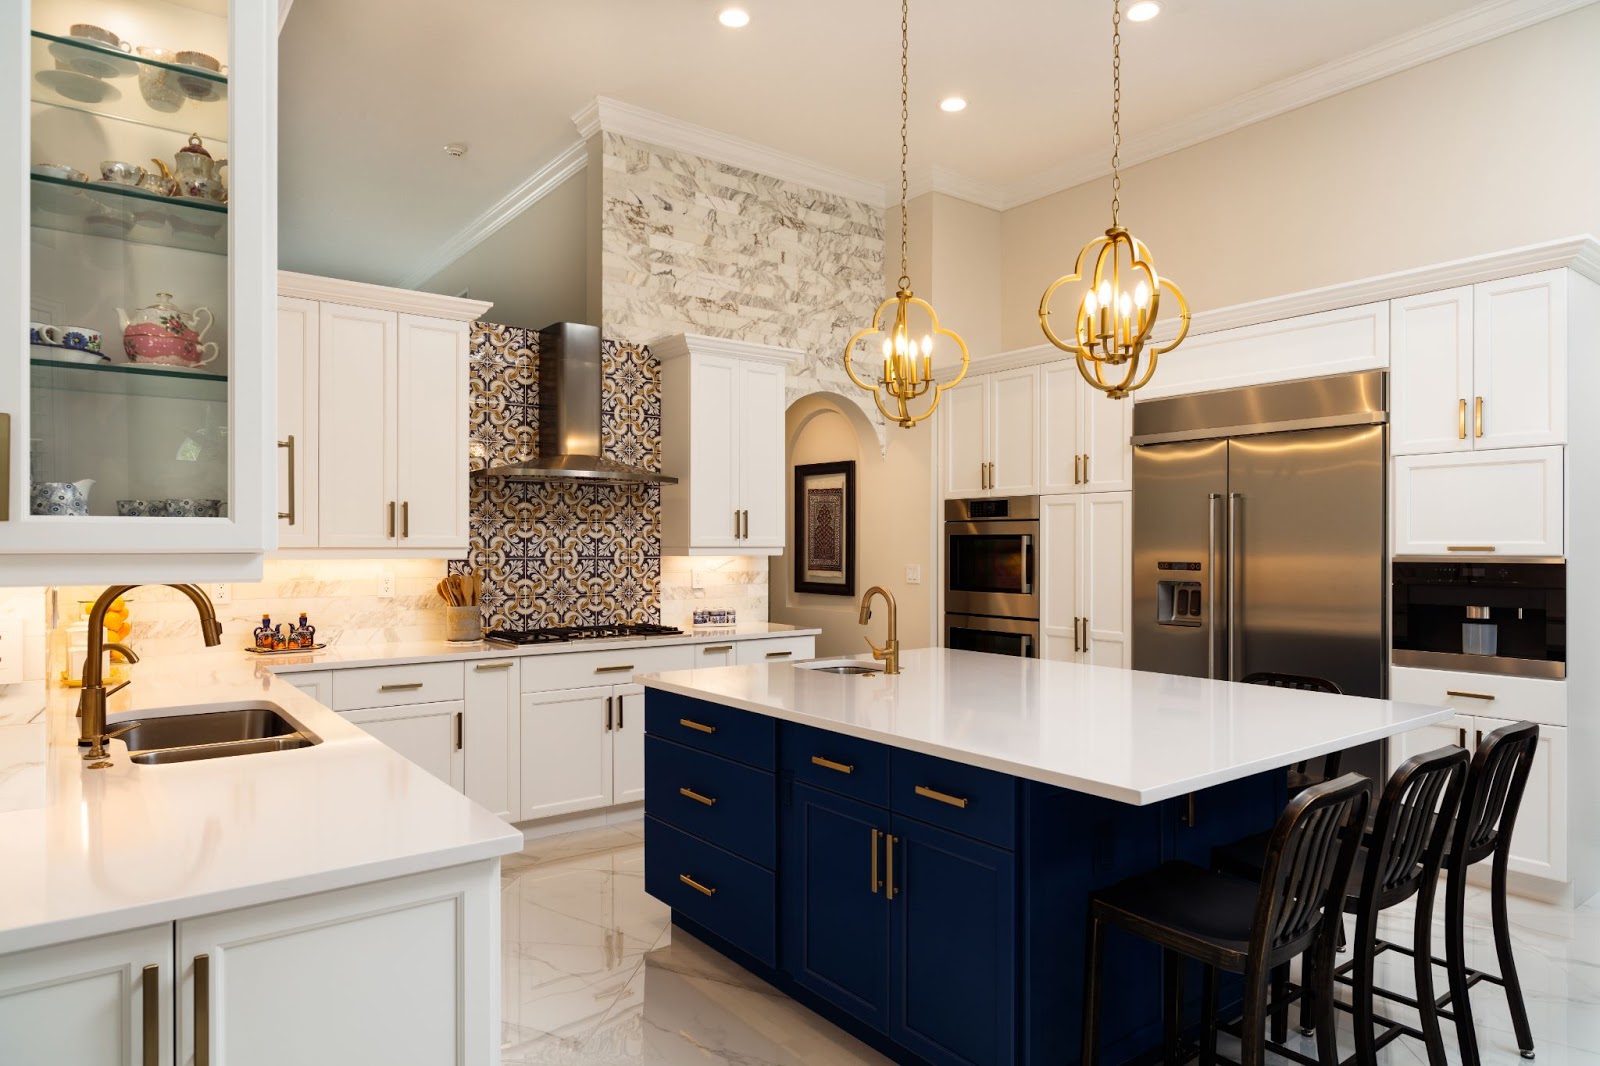 luxurious kitchen with black and white cabinets, an island, and gold hardware